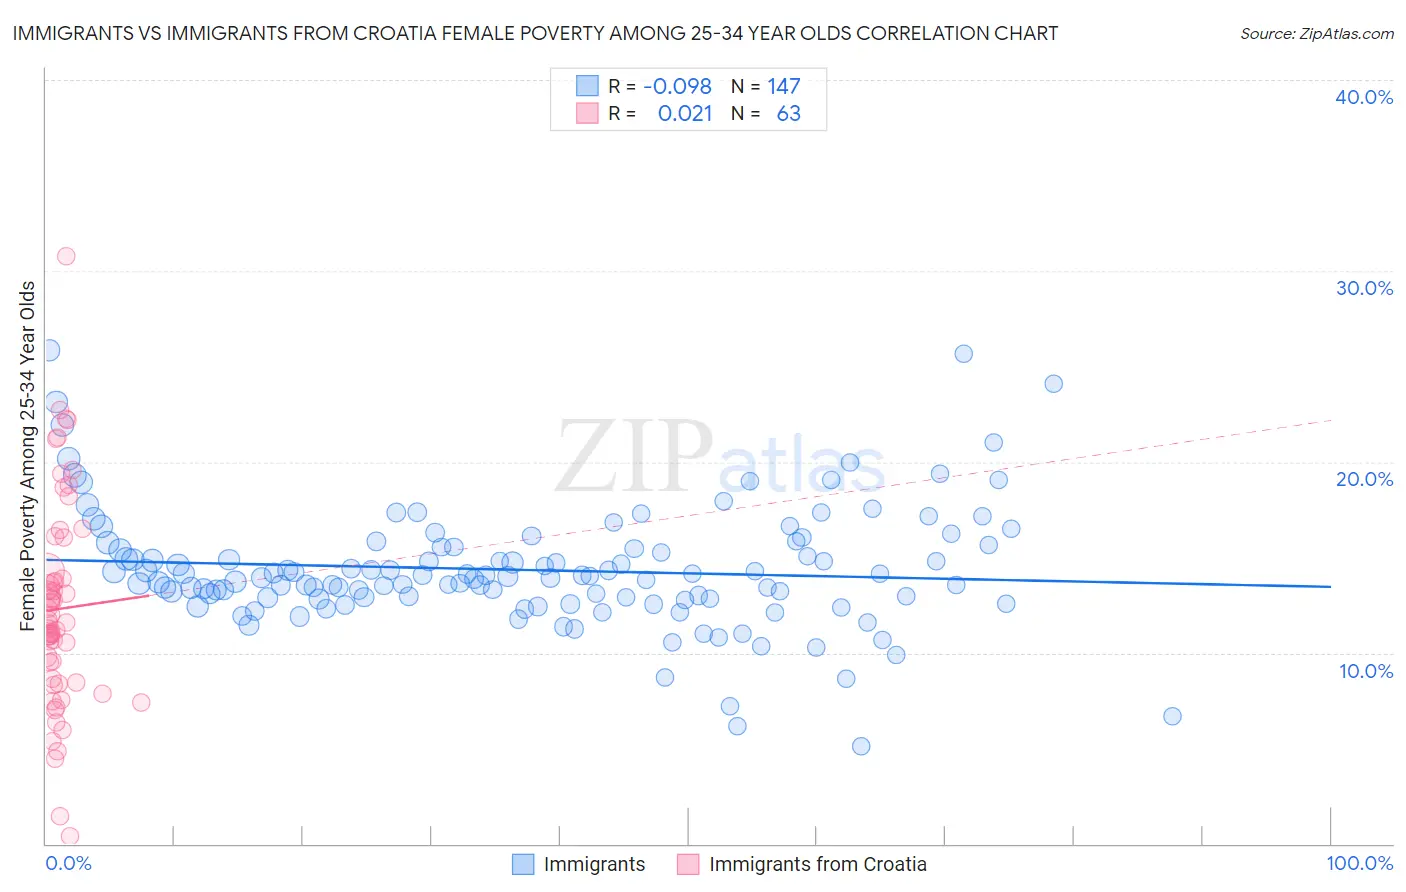 Immigrants vs Immigrants from Croatia Female Poverty Among 25-34 Year Olds